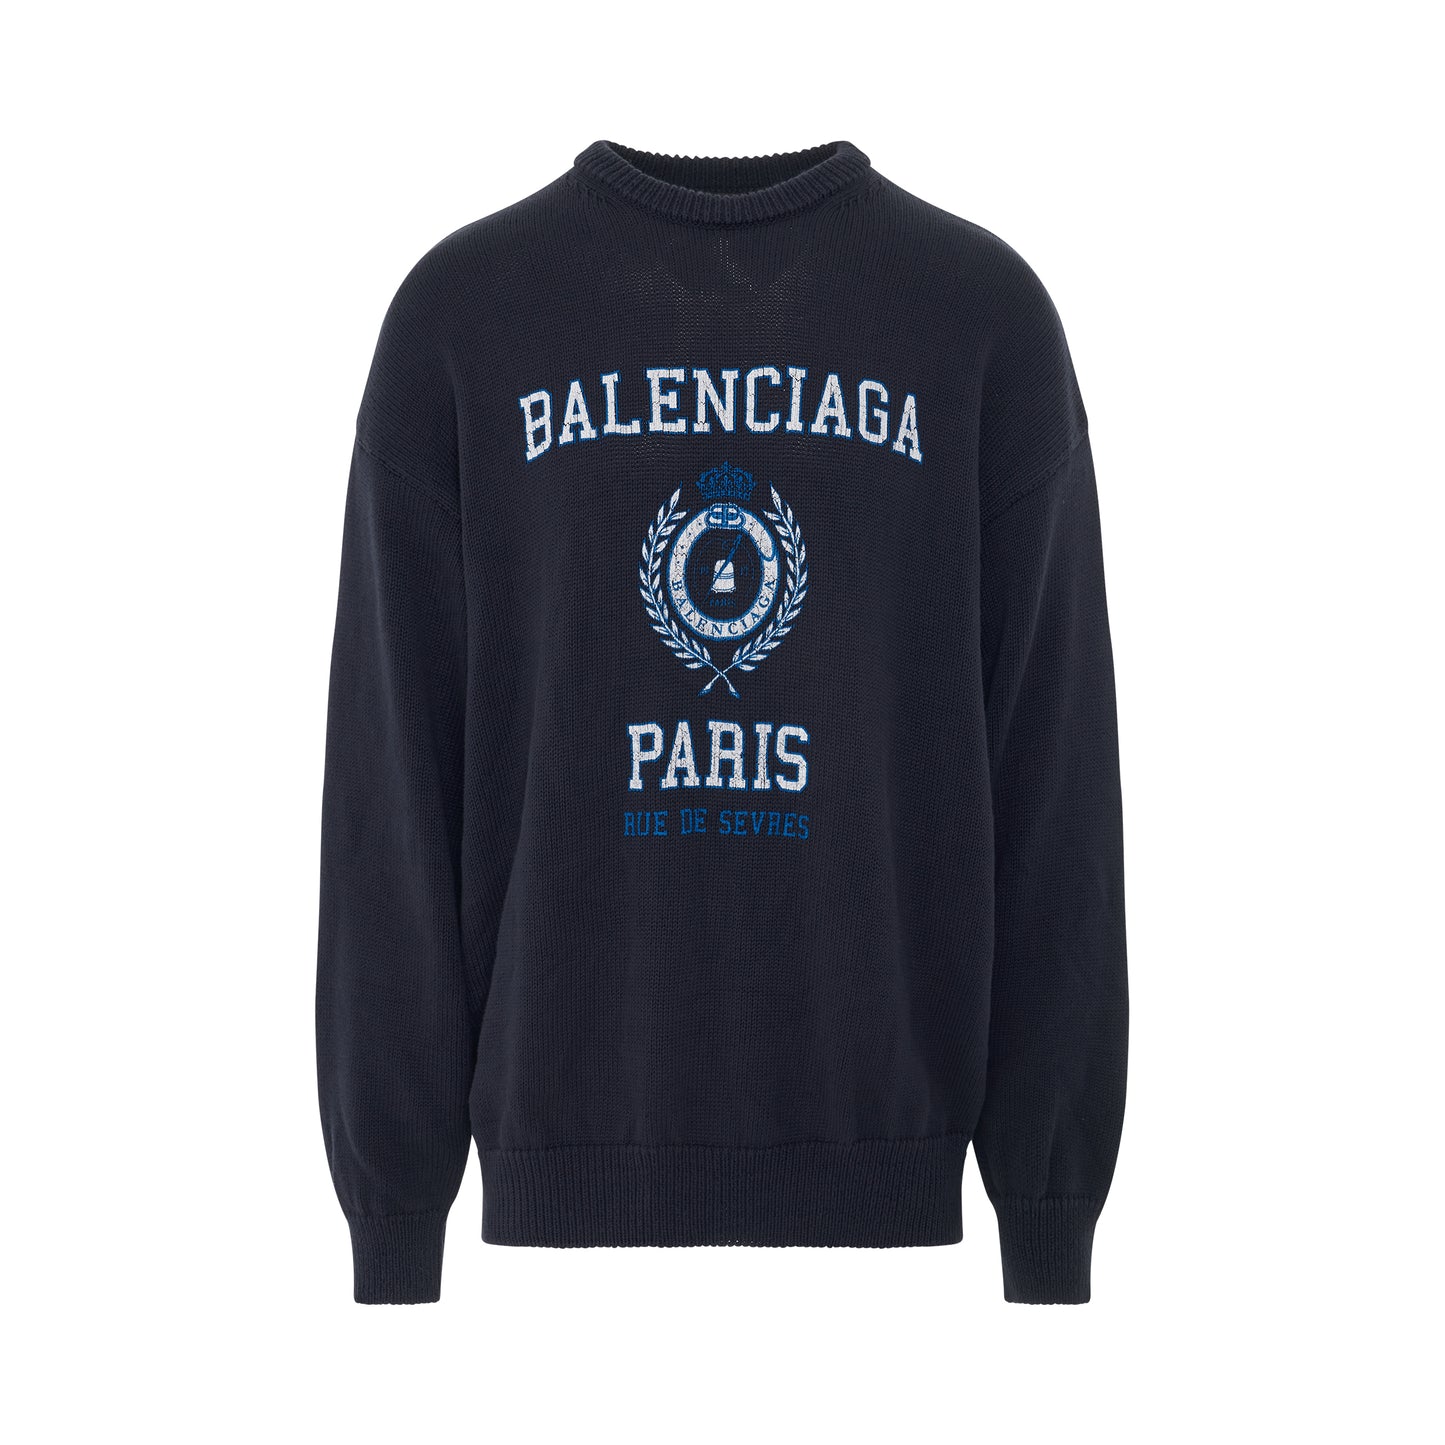 College Crest Knit Long Sleeve Crewneck in Navy/White